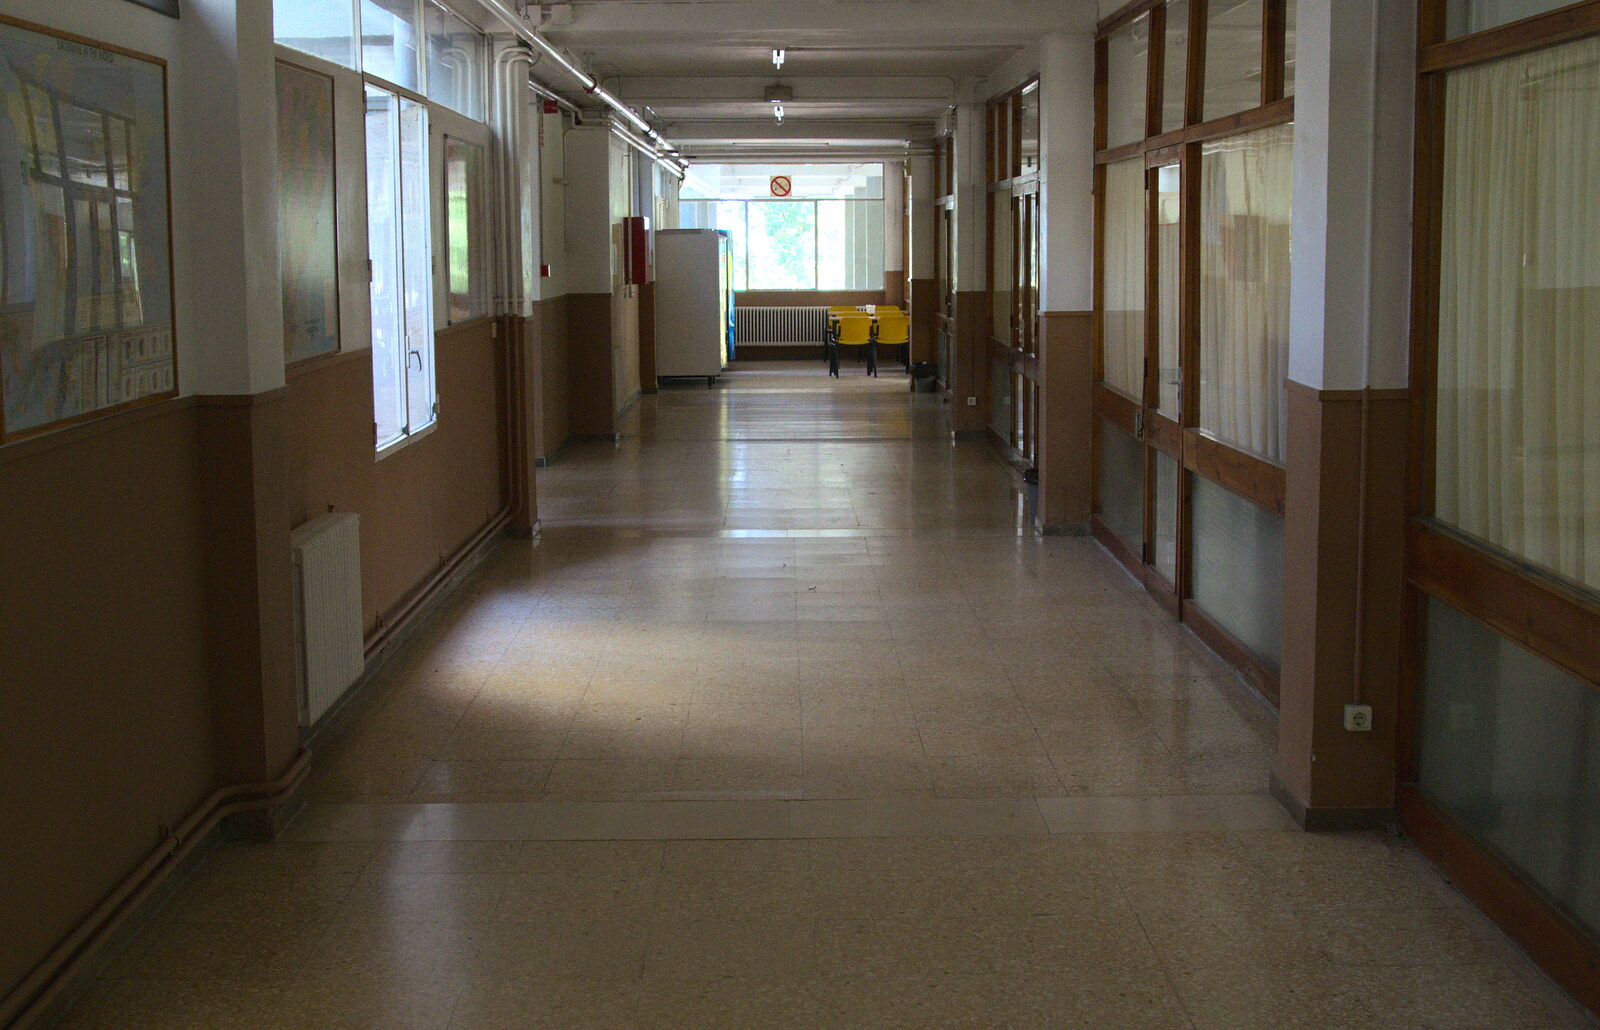 More corridors from the 1960s or 70s from The Open Education Challenge, Barcelona, Catalonia - 13th July 2014